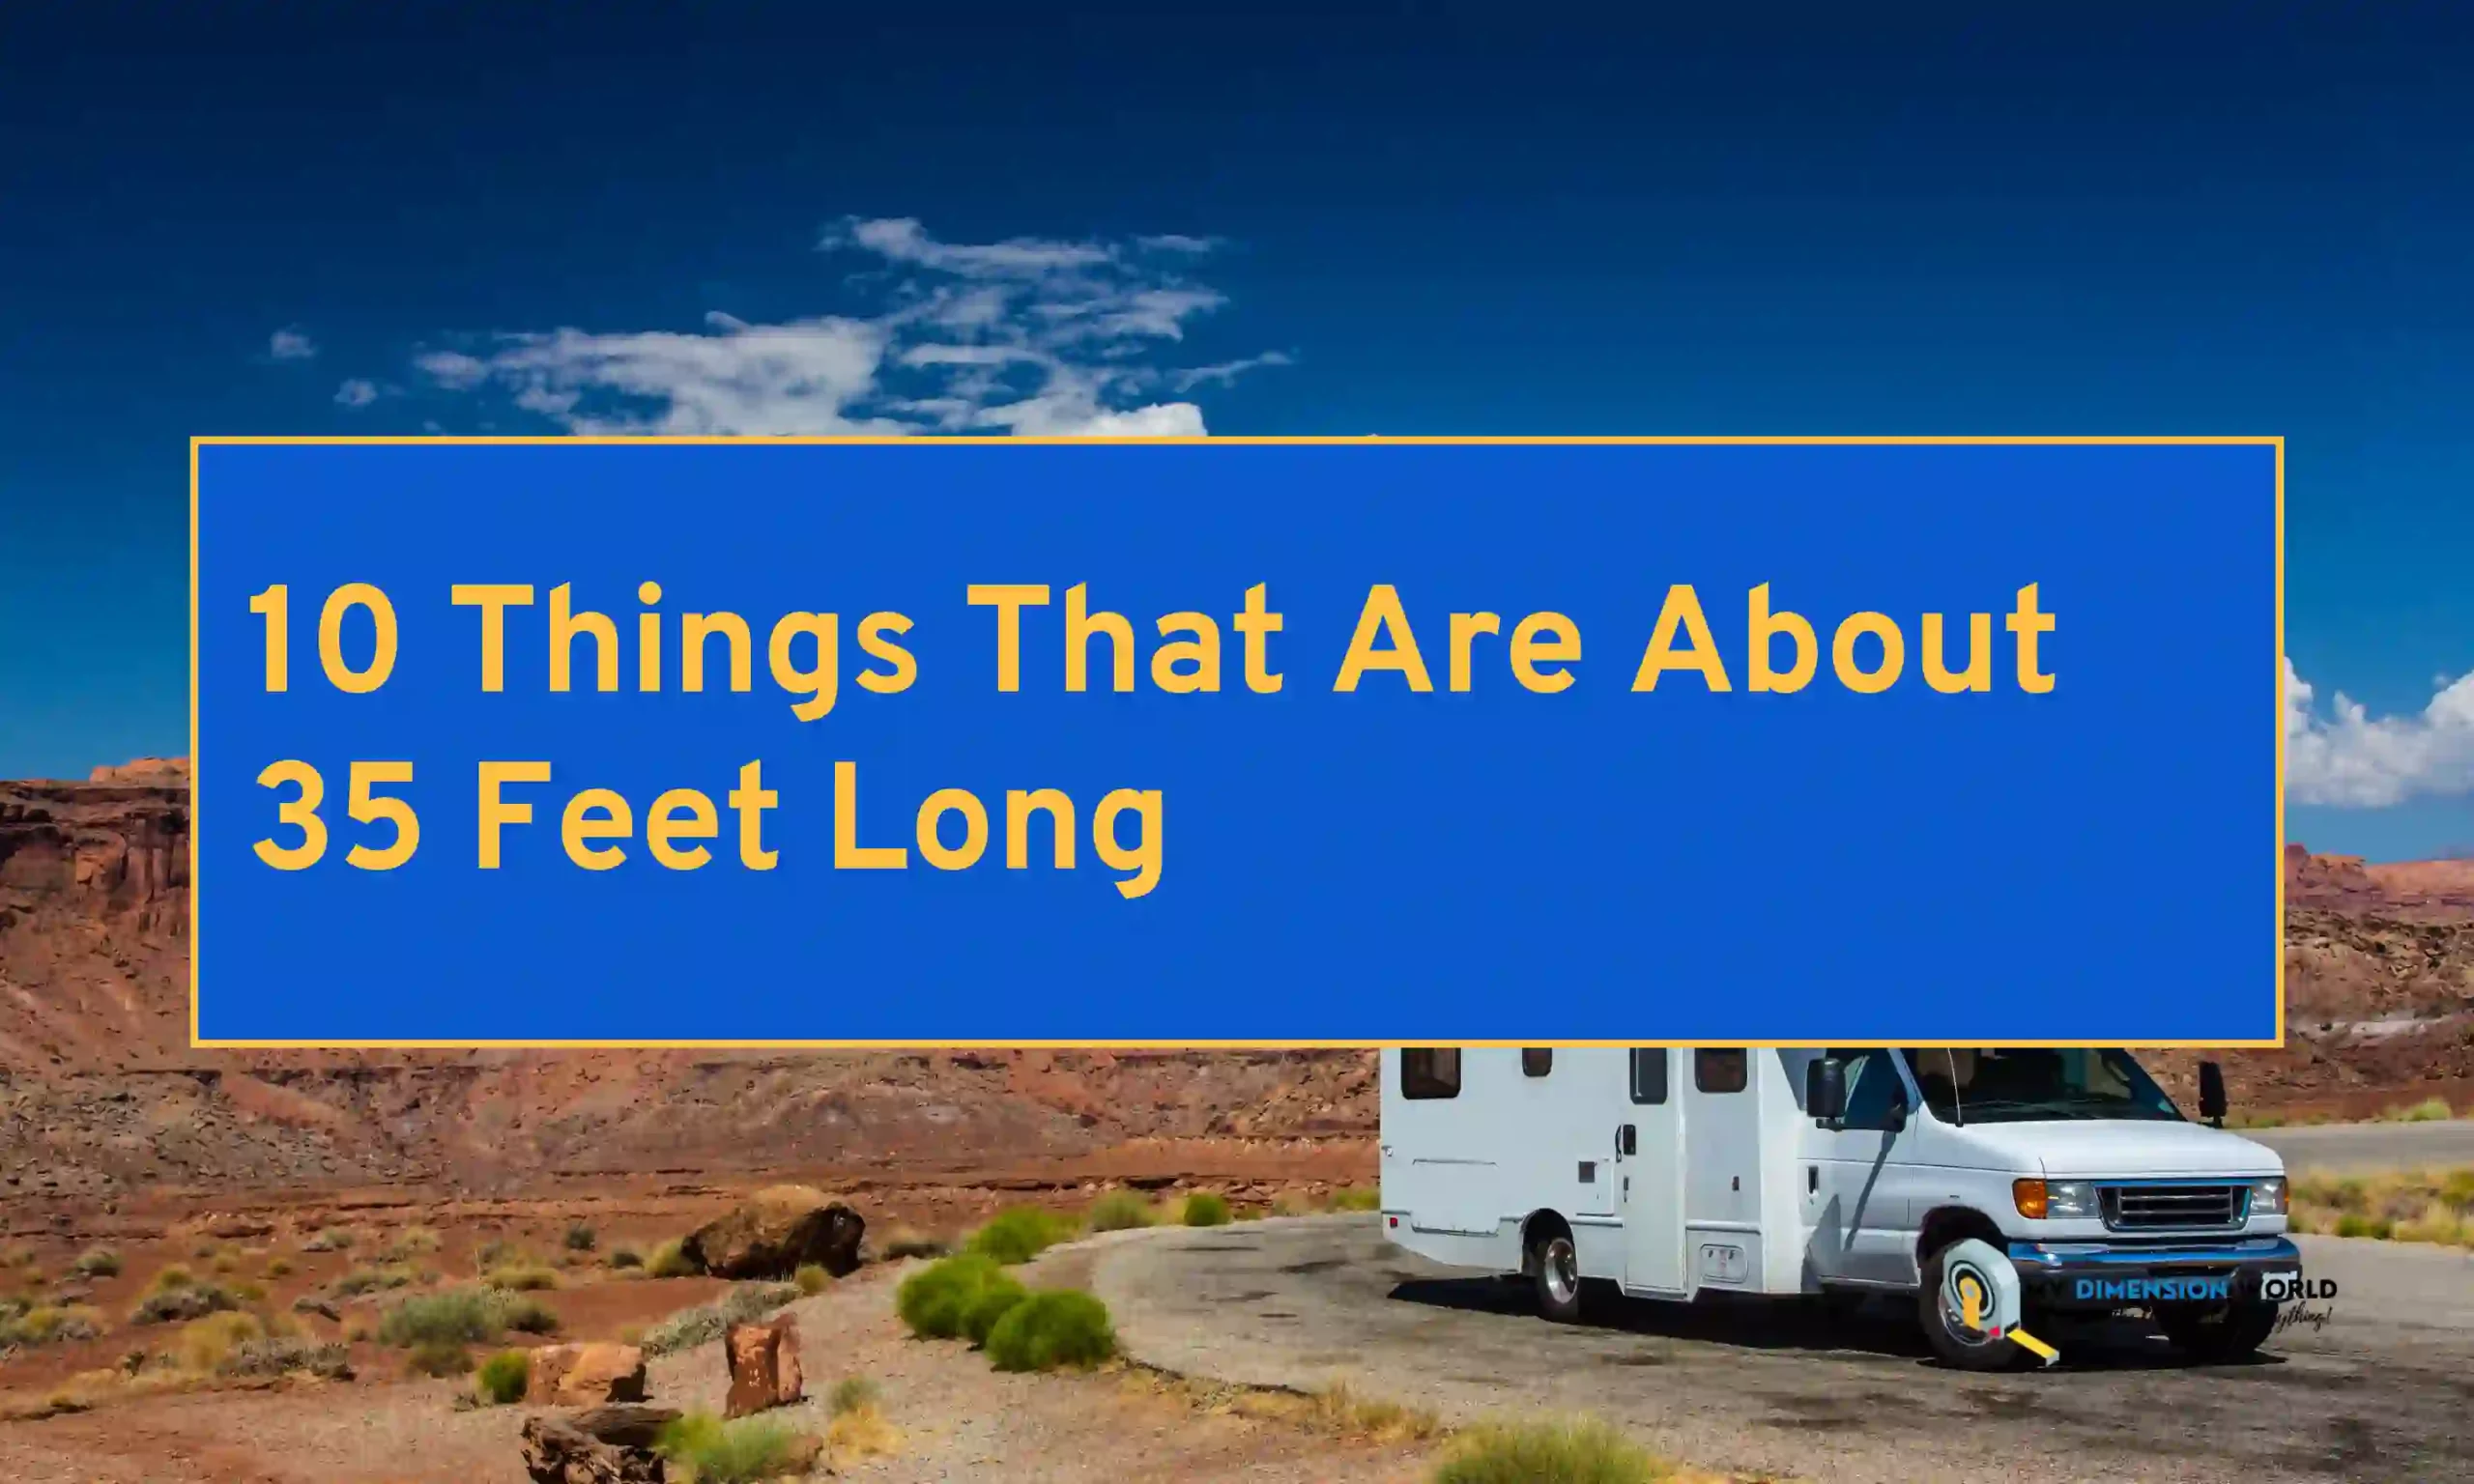 10 Things That Are About 35 Feet Long